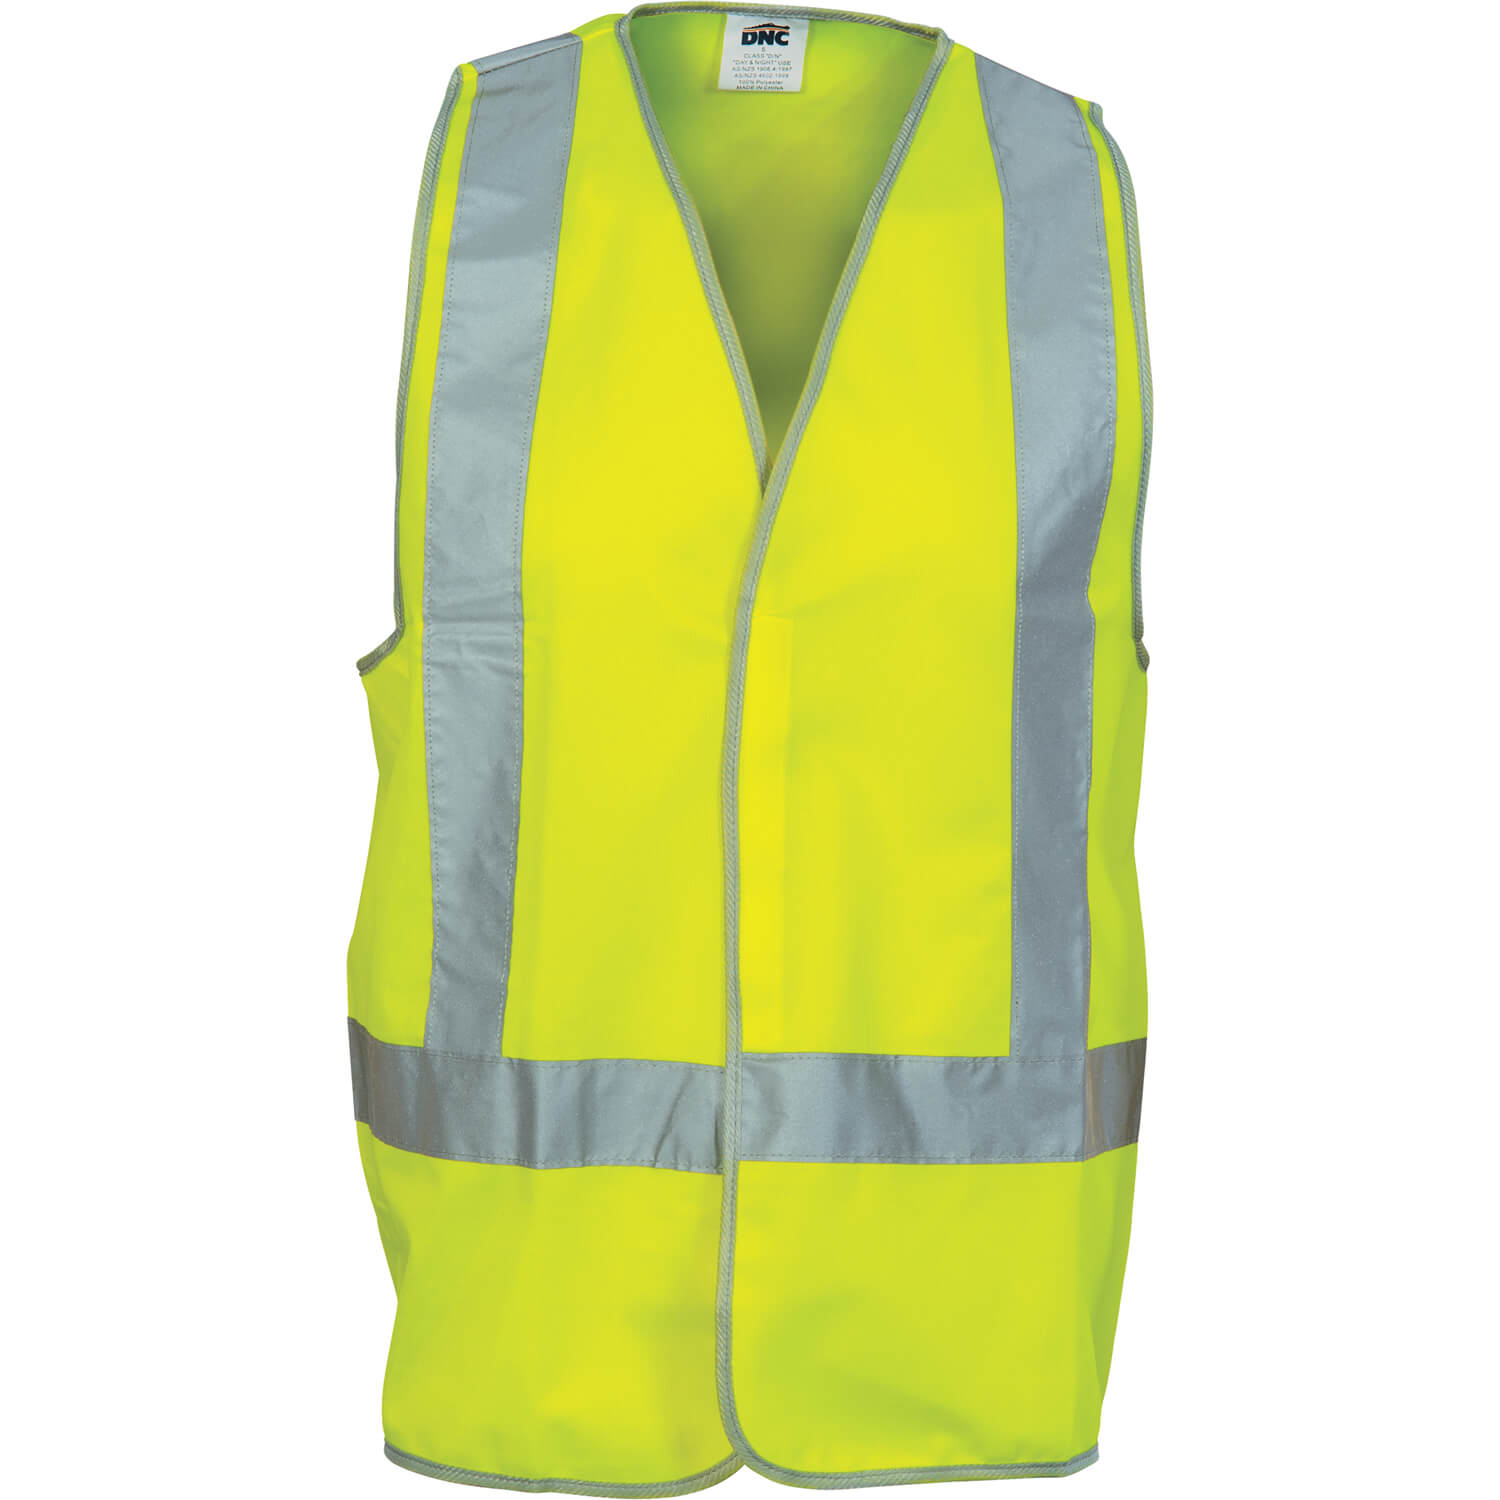 DNC Day/Night Safety Vest with H-pattern (3804)